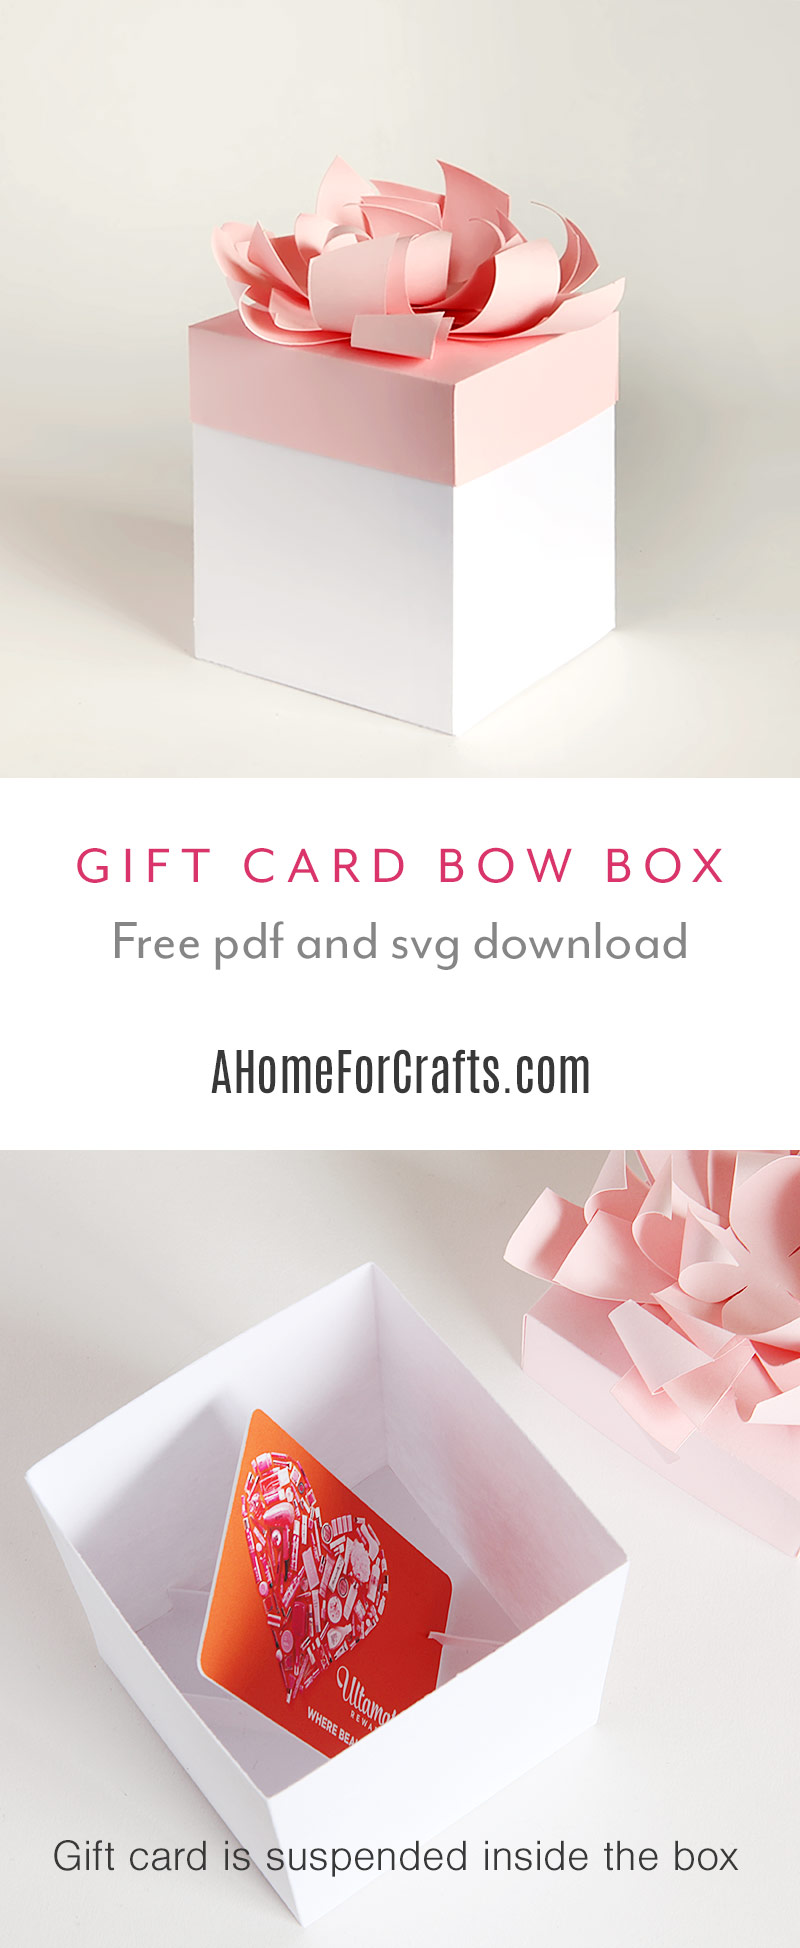 Gift card gift box with bow free svg and pdf download